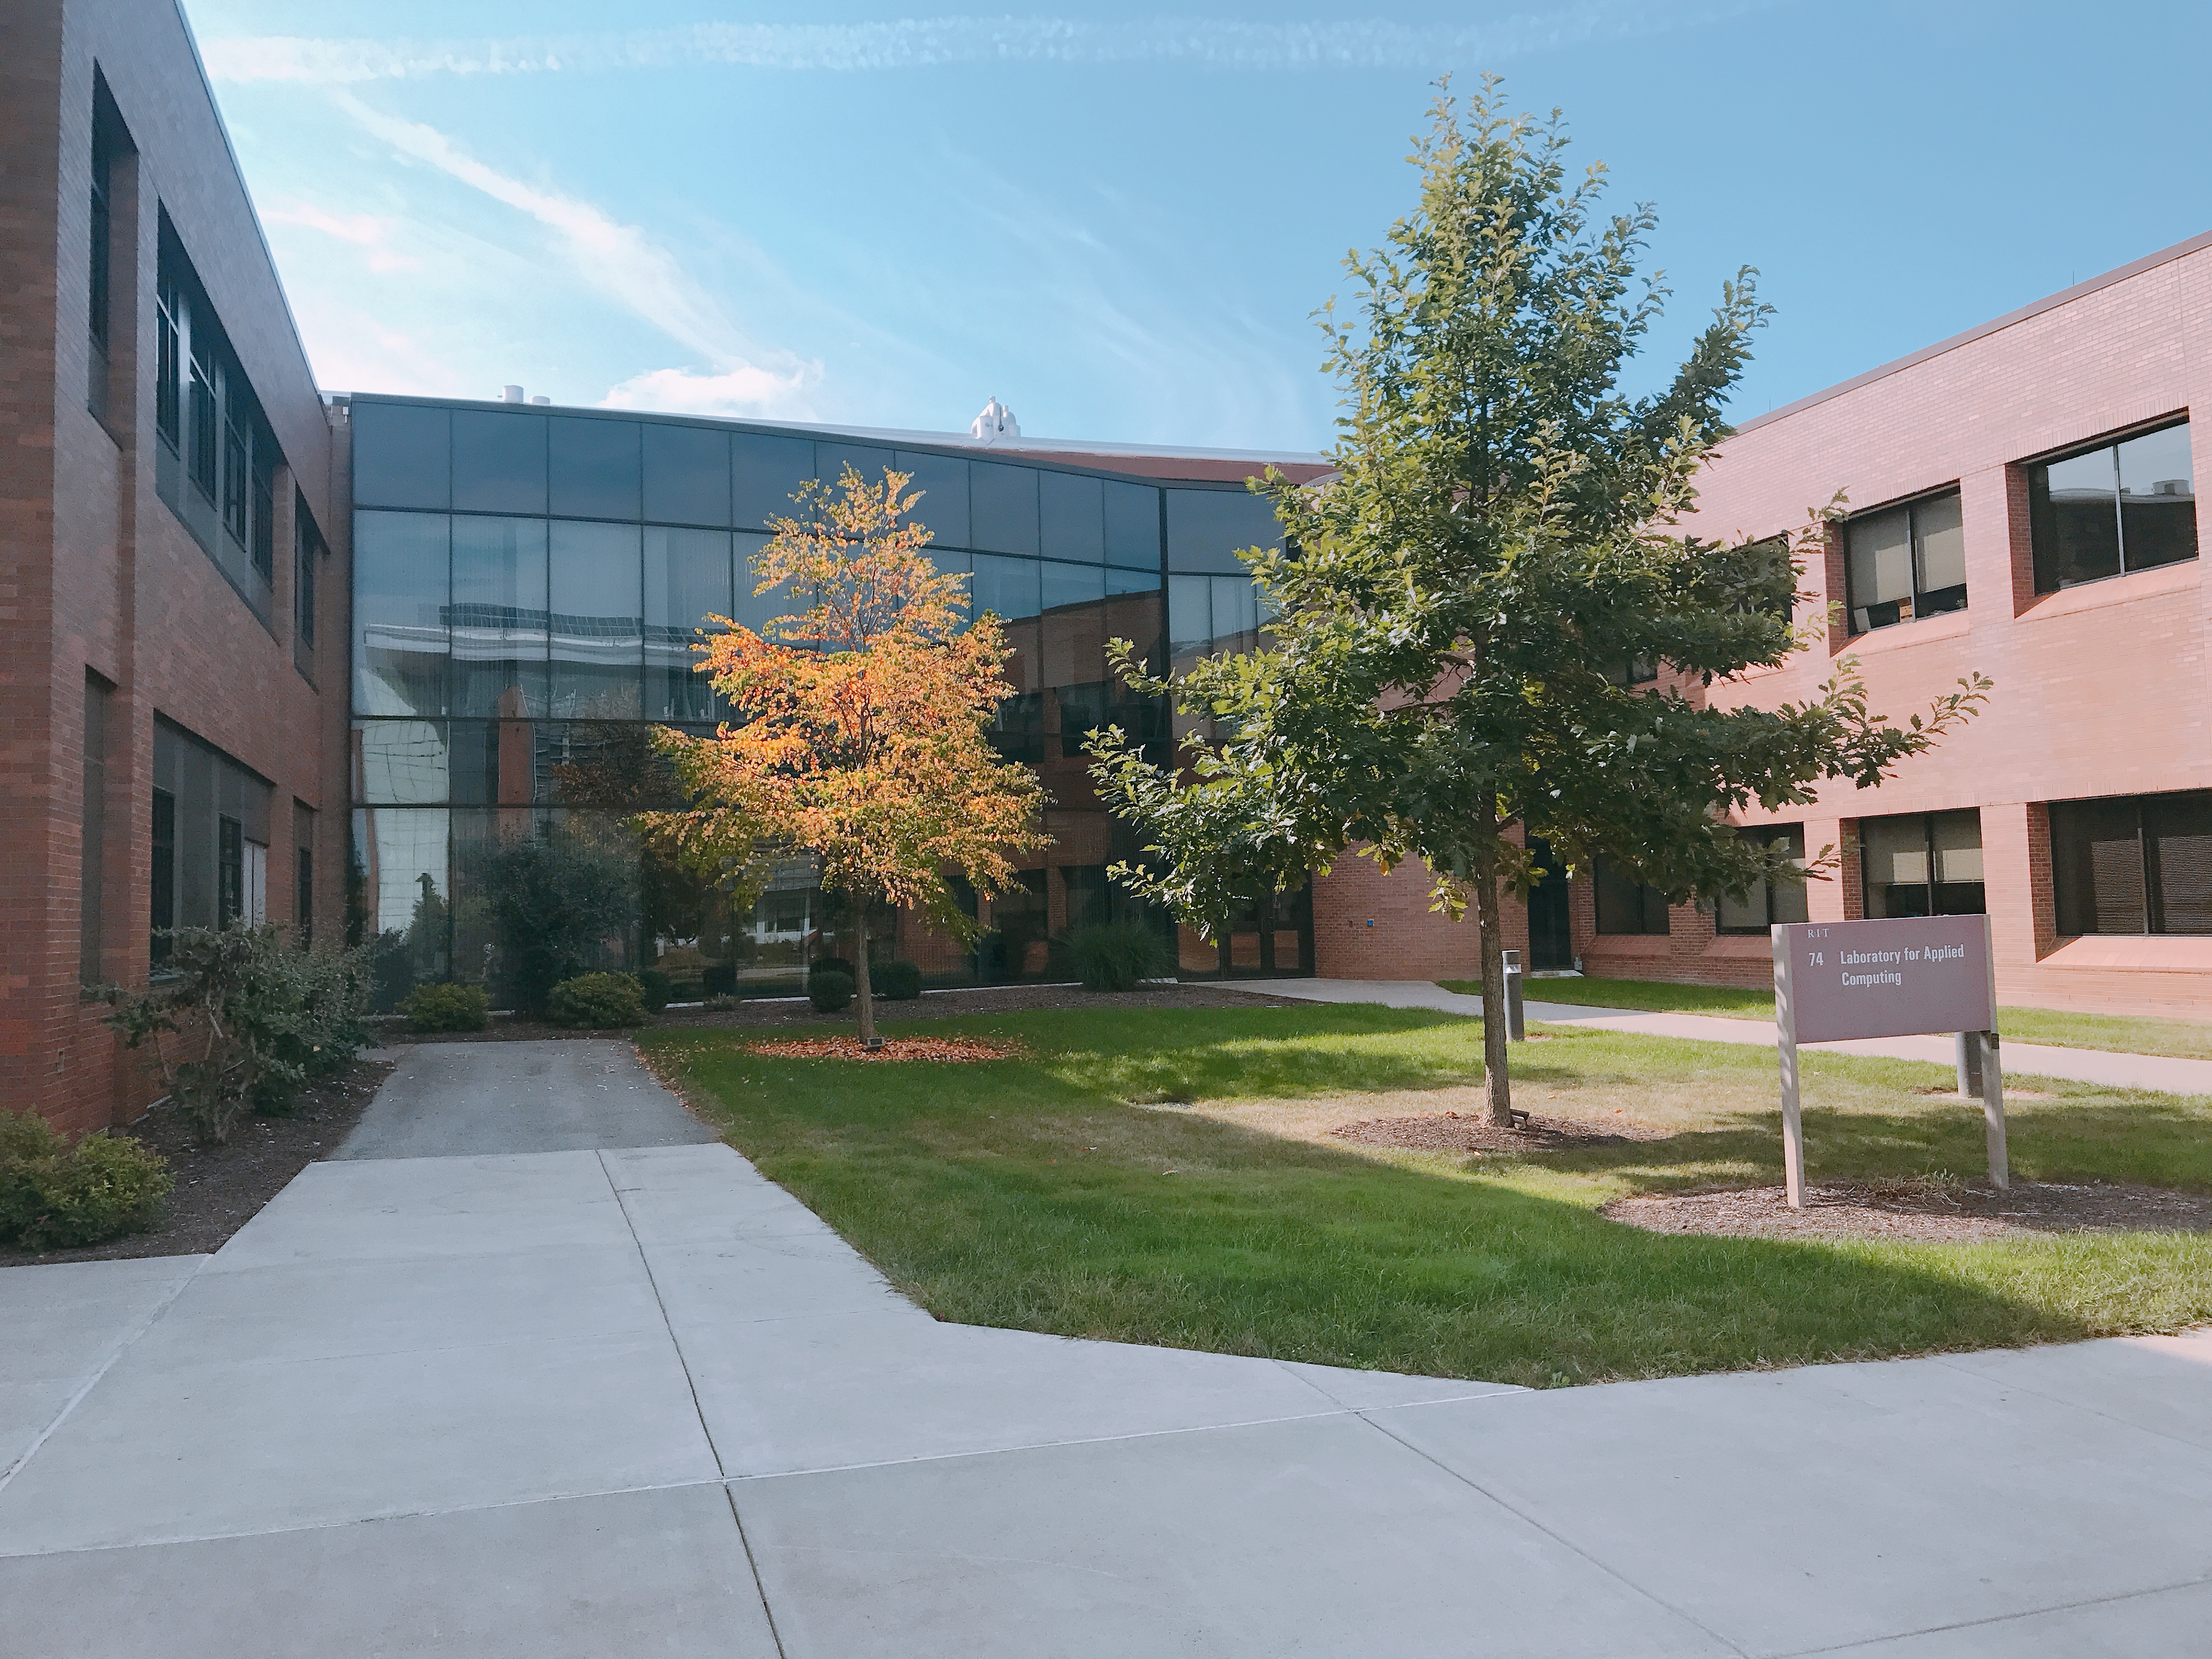 The CCRG is located on the 2nd floor of RIT's Building 74, the Laboratory for Applied Computing